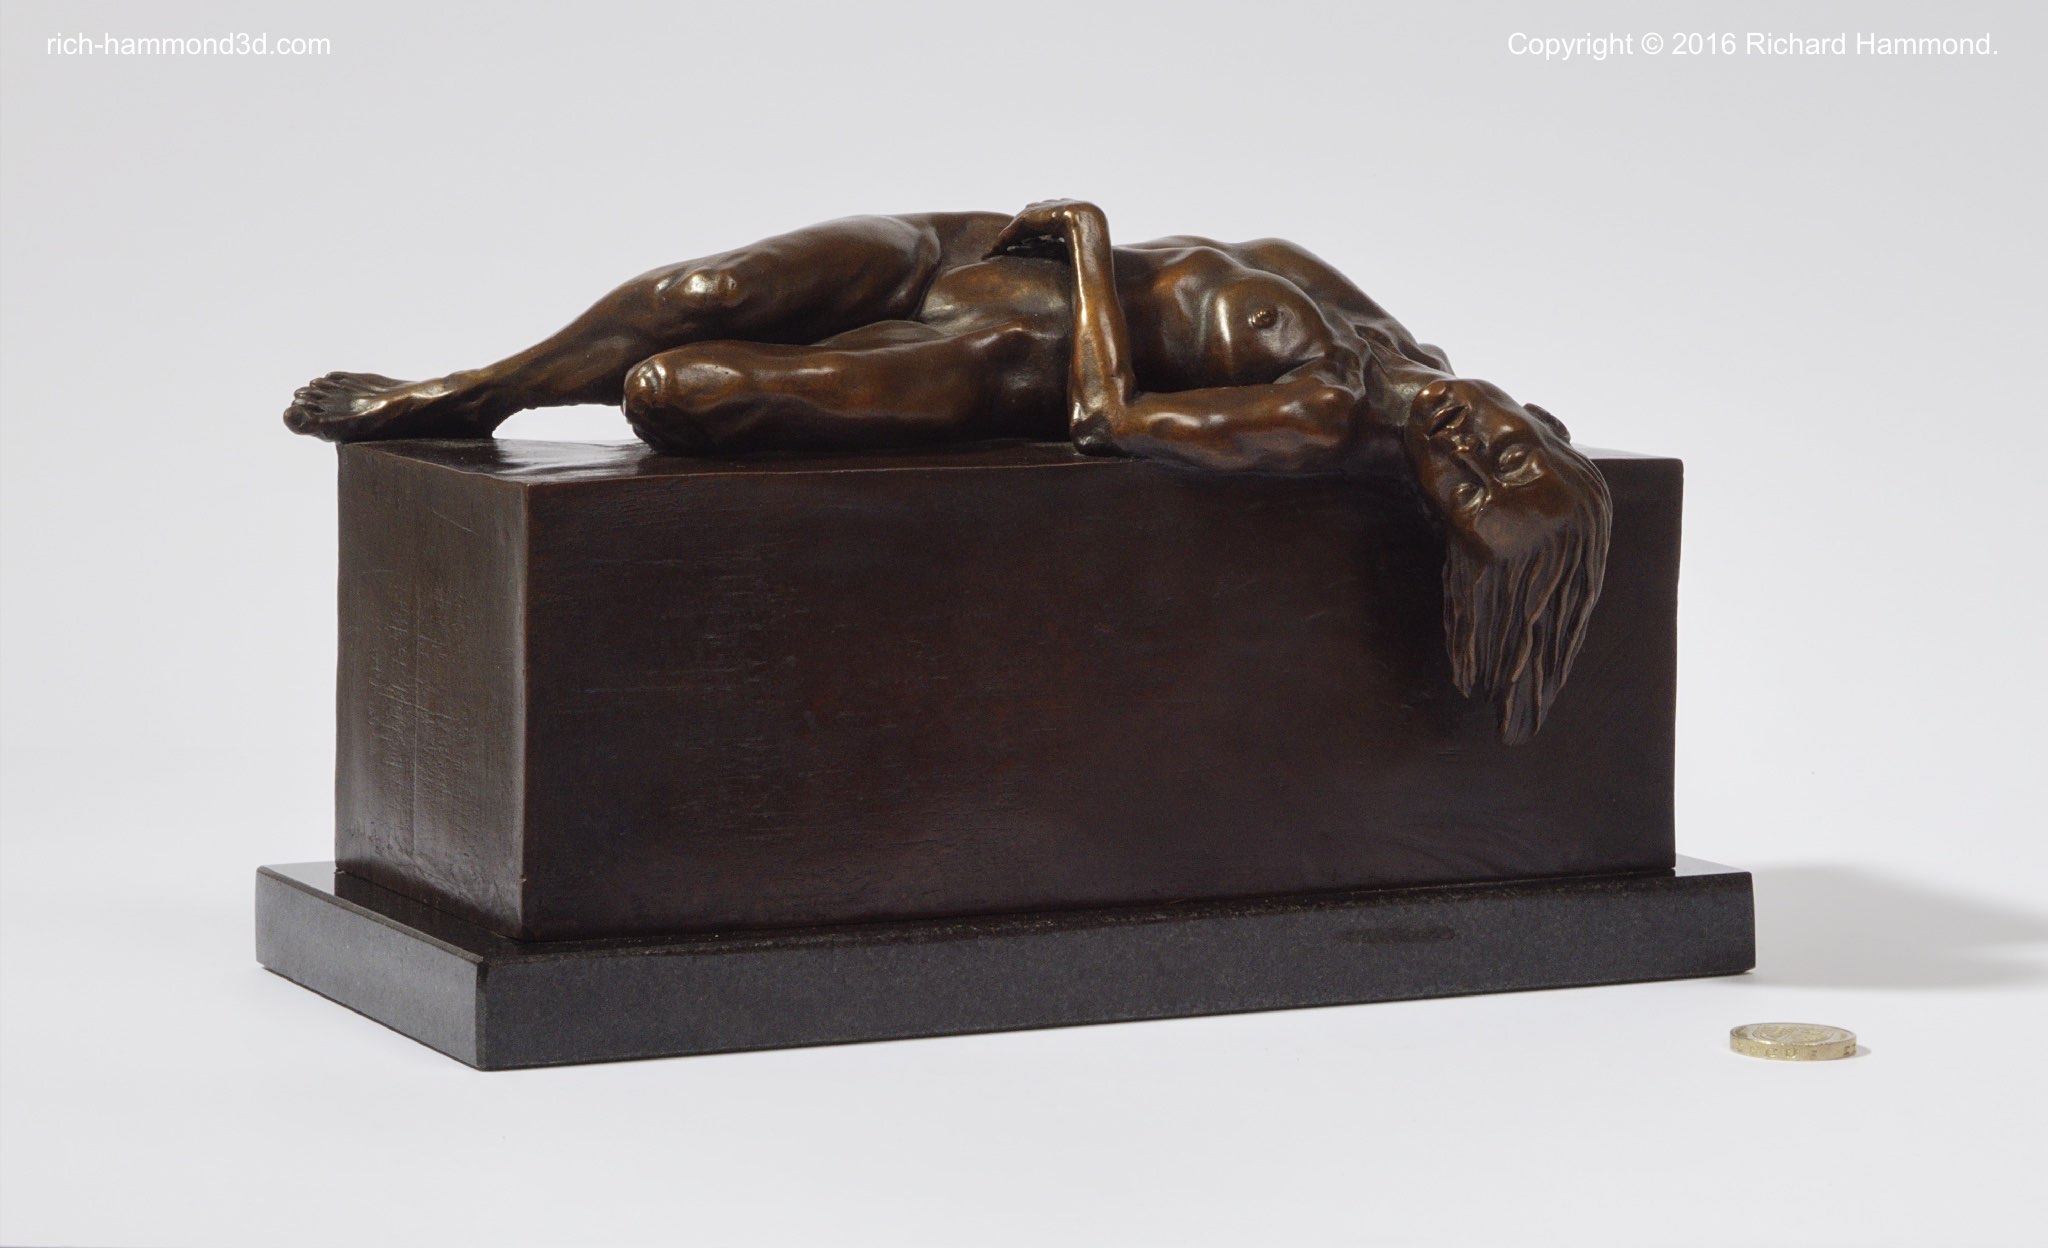 This piece was sculpted from life, after a pose by Rodin.